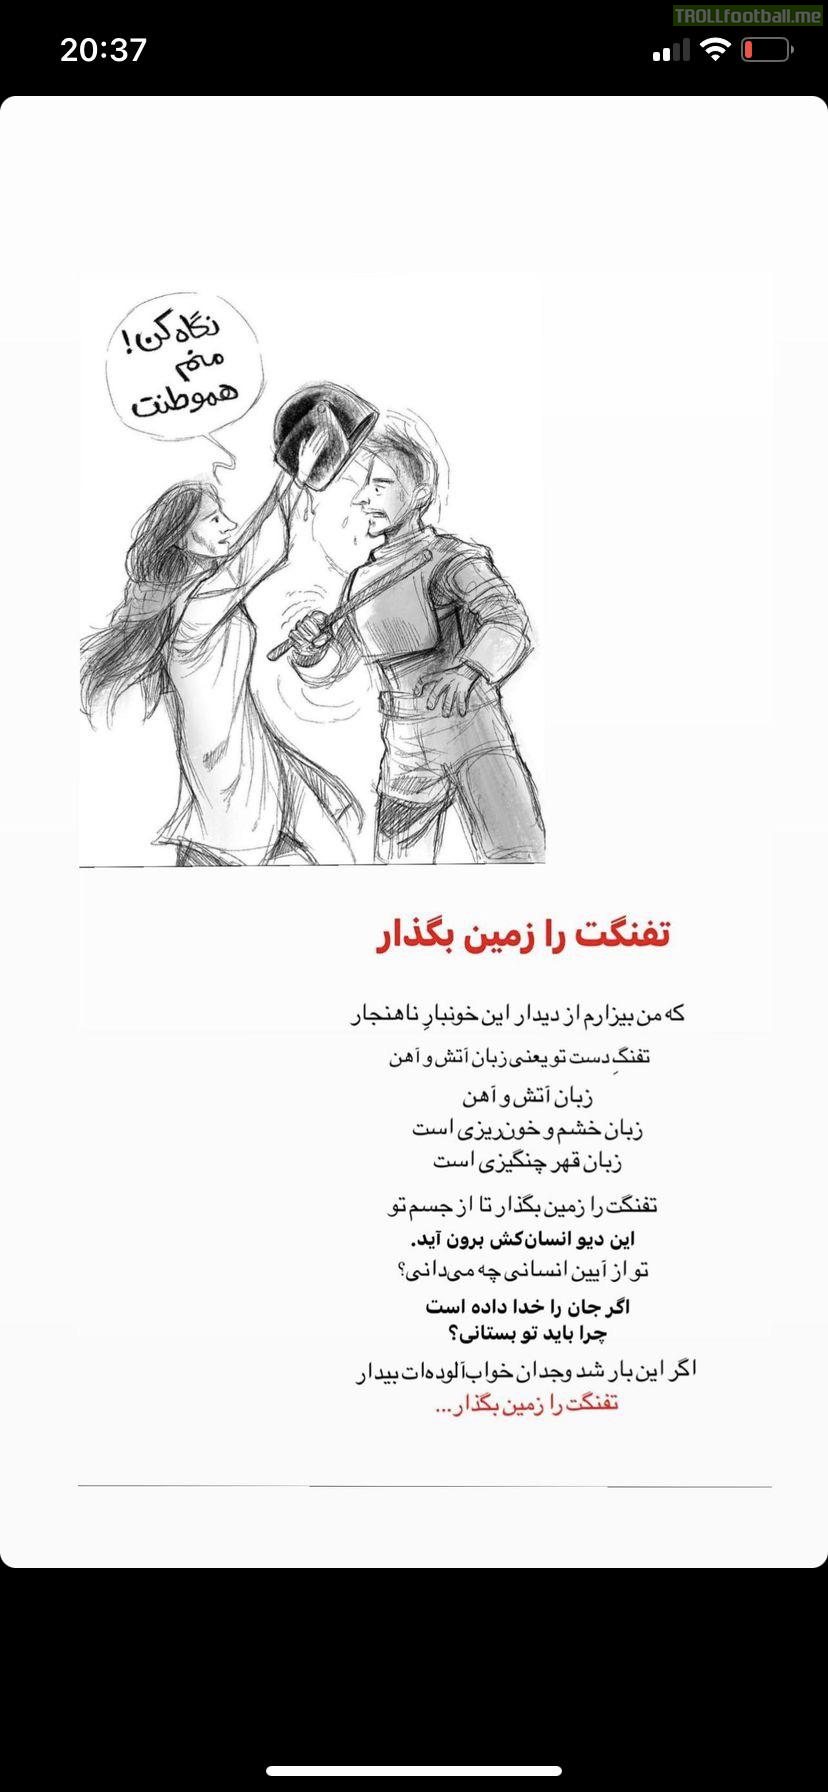 Story of Iran CB Majid Hosseini following recent crackdown of protests.